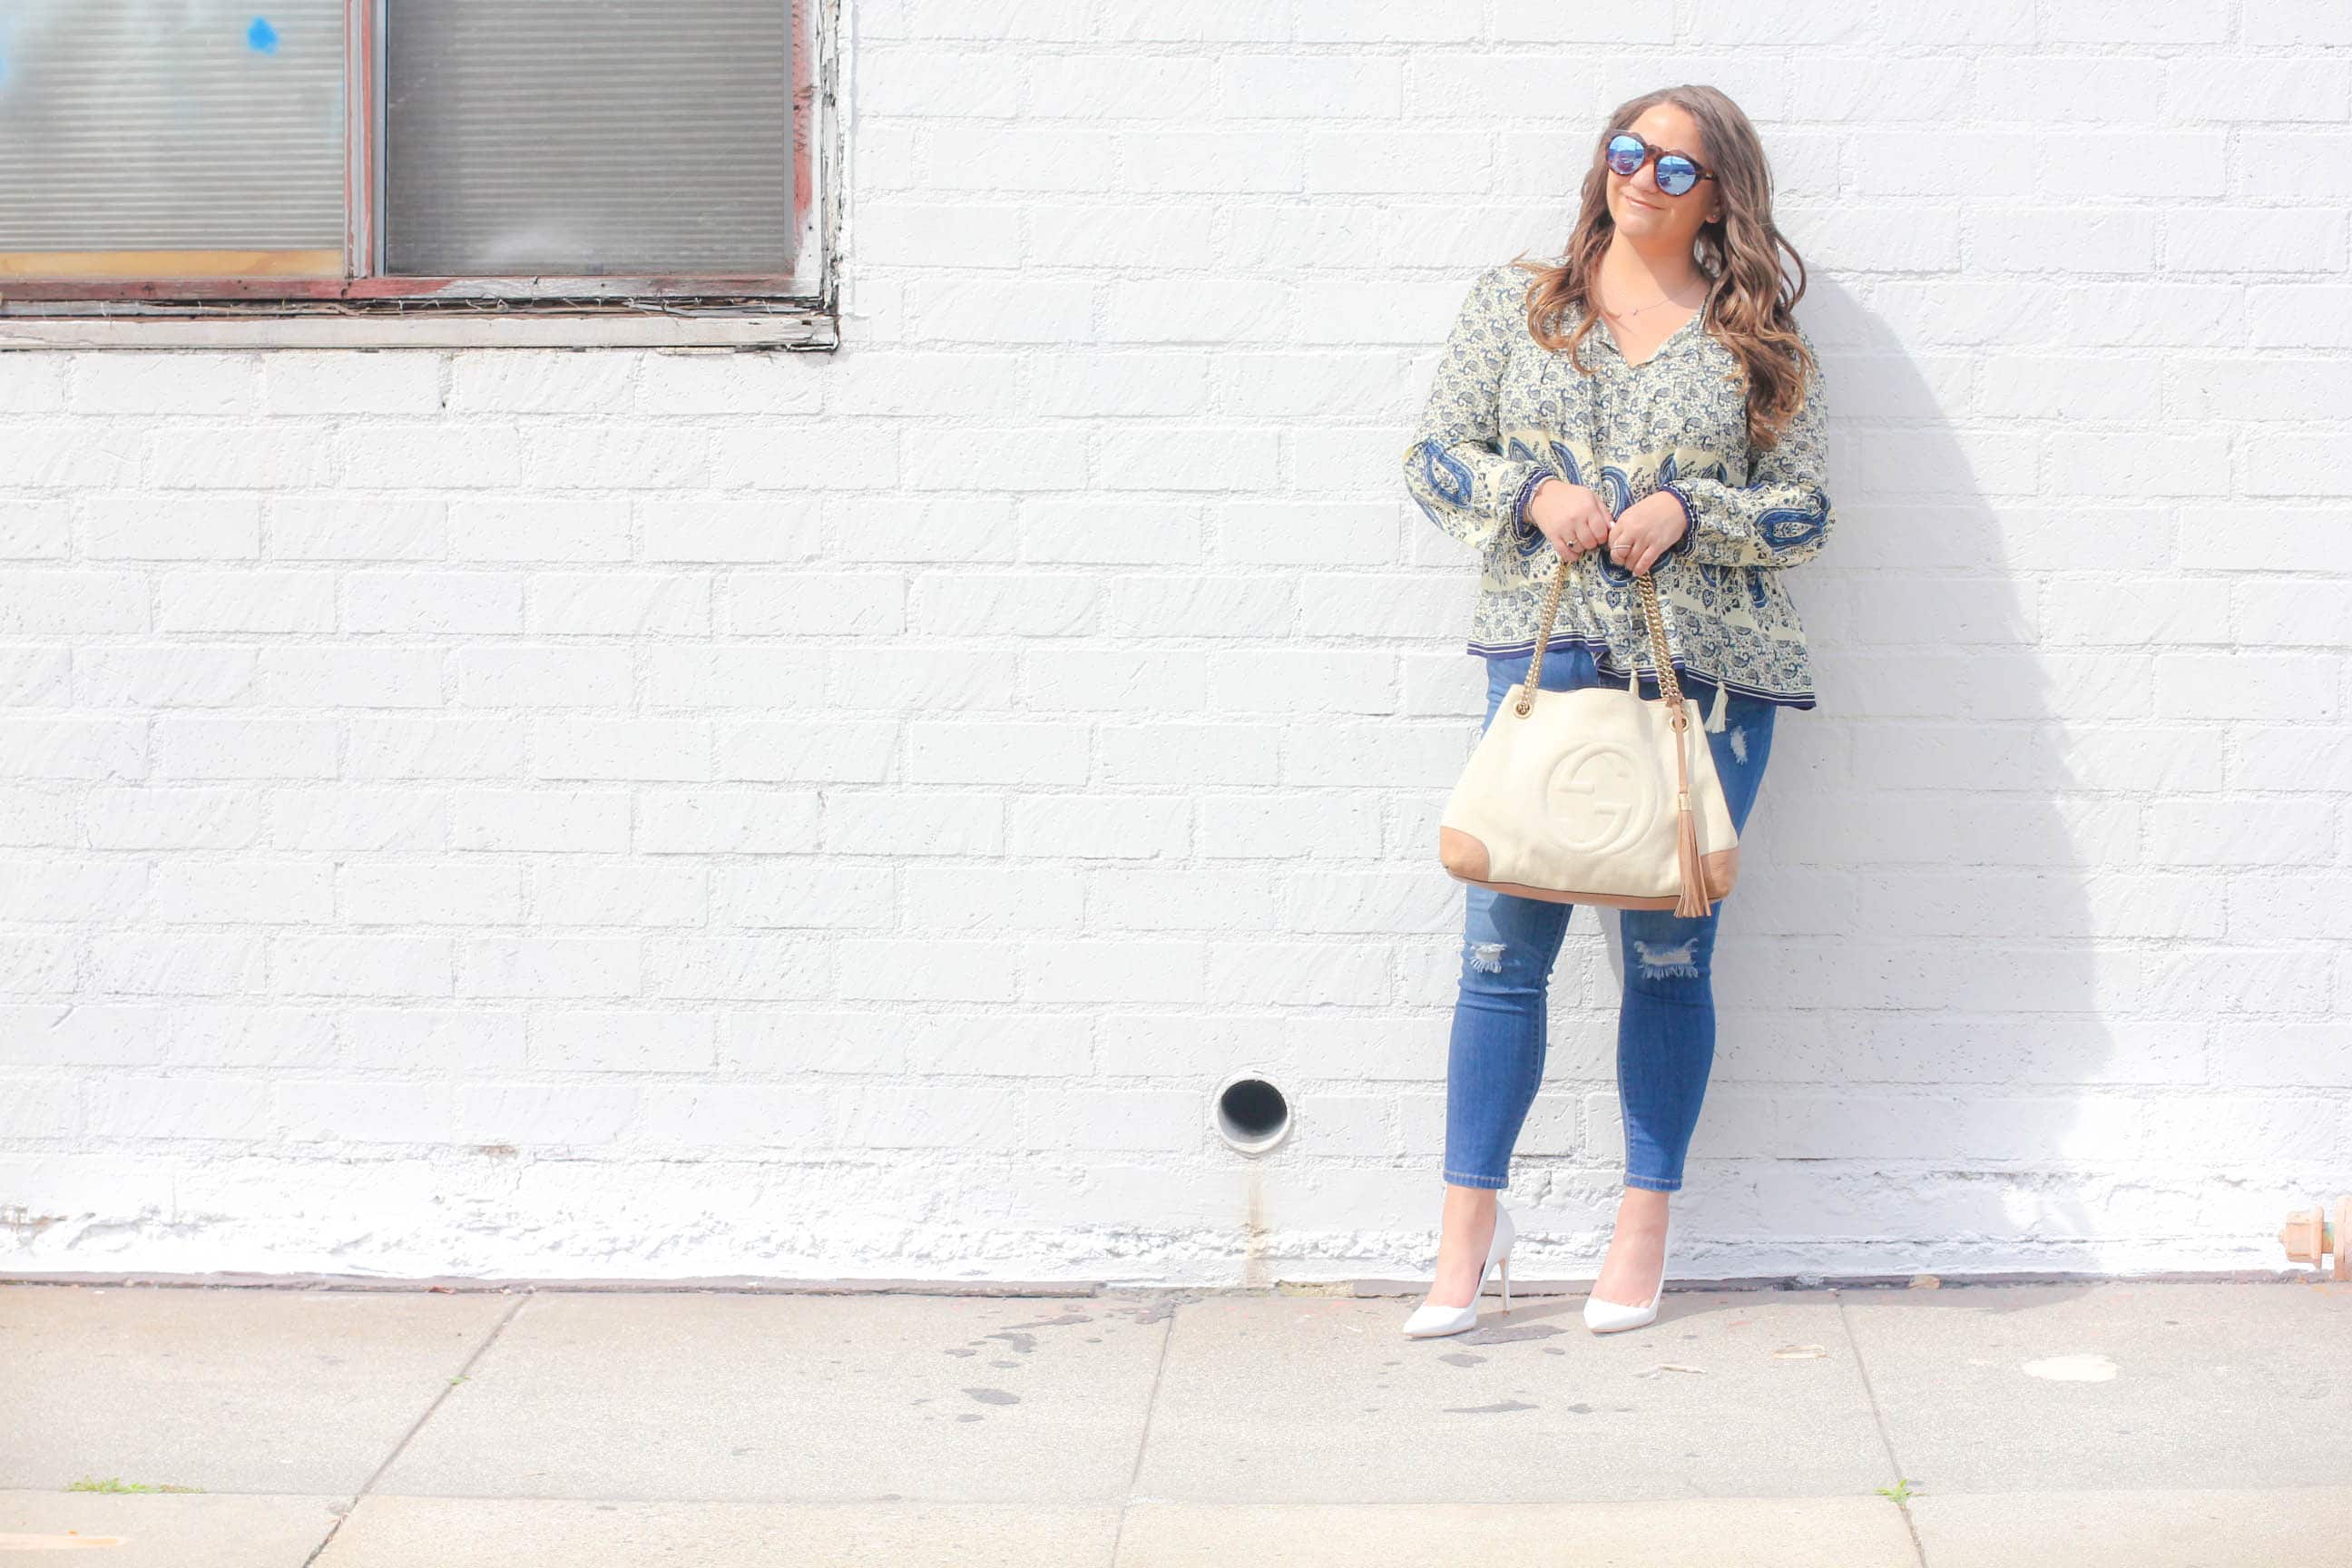 missyonmadison, melissa tierney, missyonmadison instagram, melissa tierney instagram, wild blue denim, white pumps, white pointed toe pumps, gucci, gucci soho tote, white gucci soho tote, bloglovin, fashion blogger,style blogger, spring style, spring trends 2017, spring style 2017, jeggings, wild blue jeggings, ripped jeans, reipped jeggings, fashion trends, le specs sunglasses, le specs, wild blue denim boho top, paisley print top, boho top, how to style skinny jeans, how to style white pumps, how to style distressed jeans, la blogger, affordable fashion,